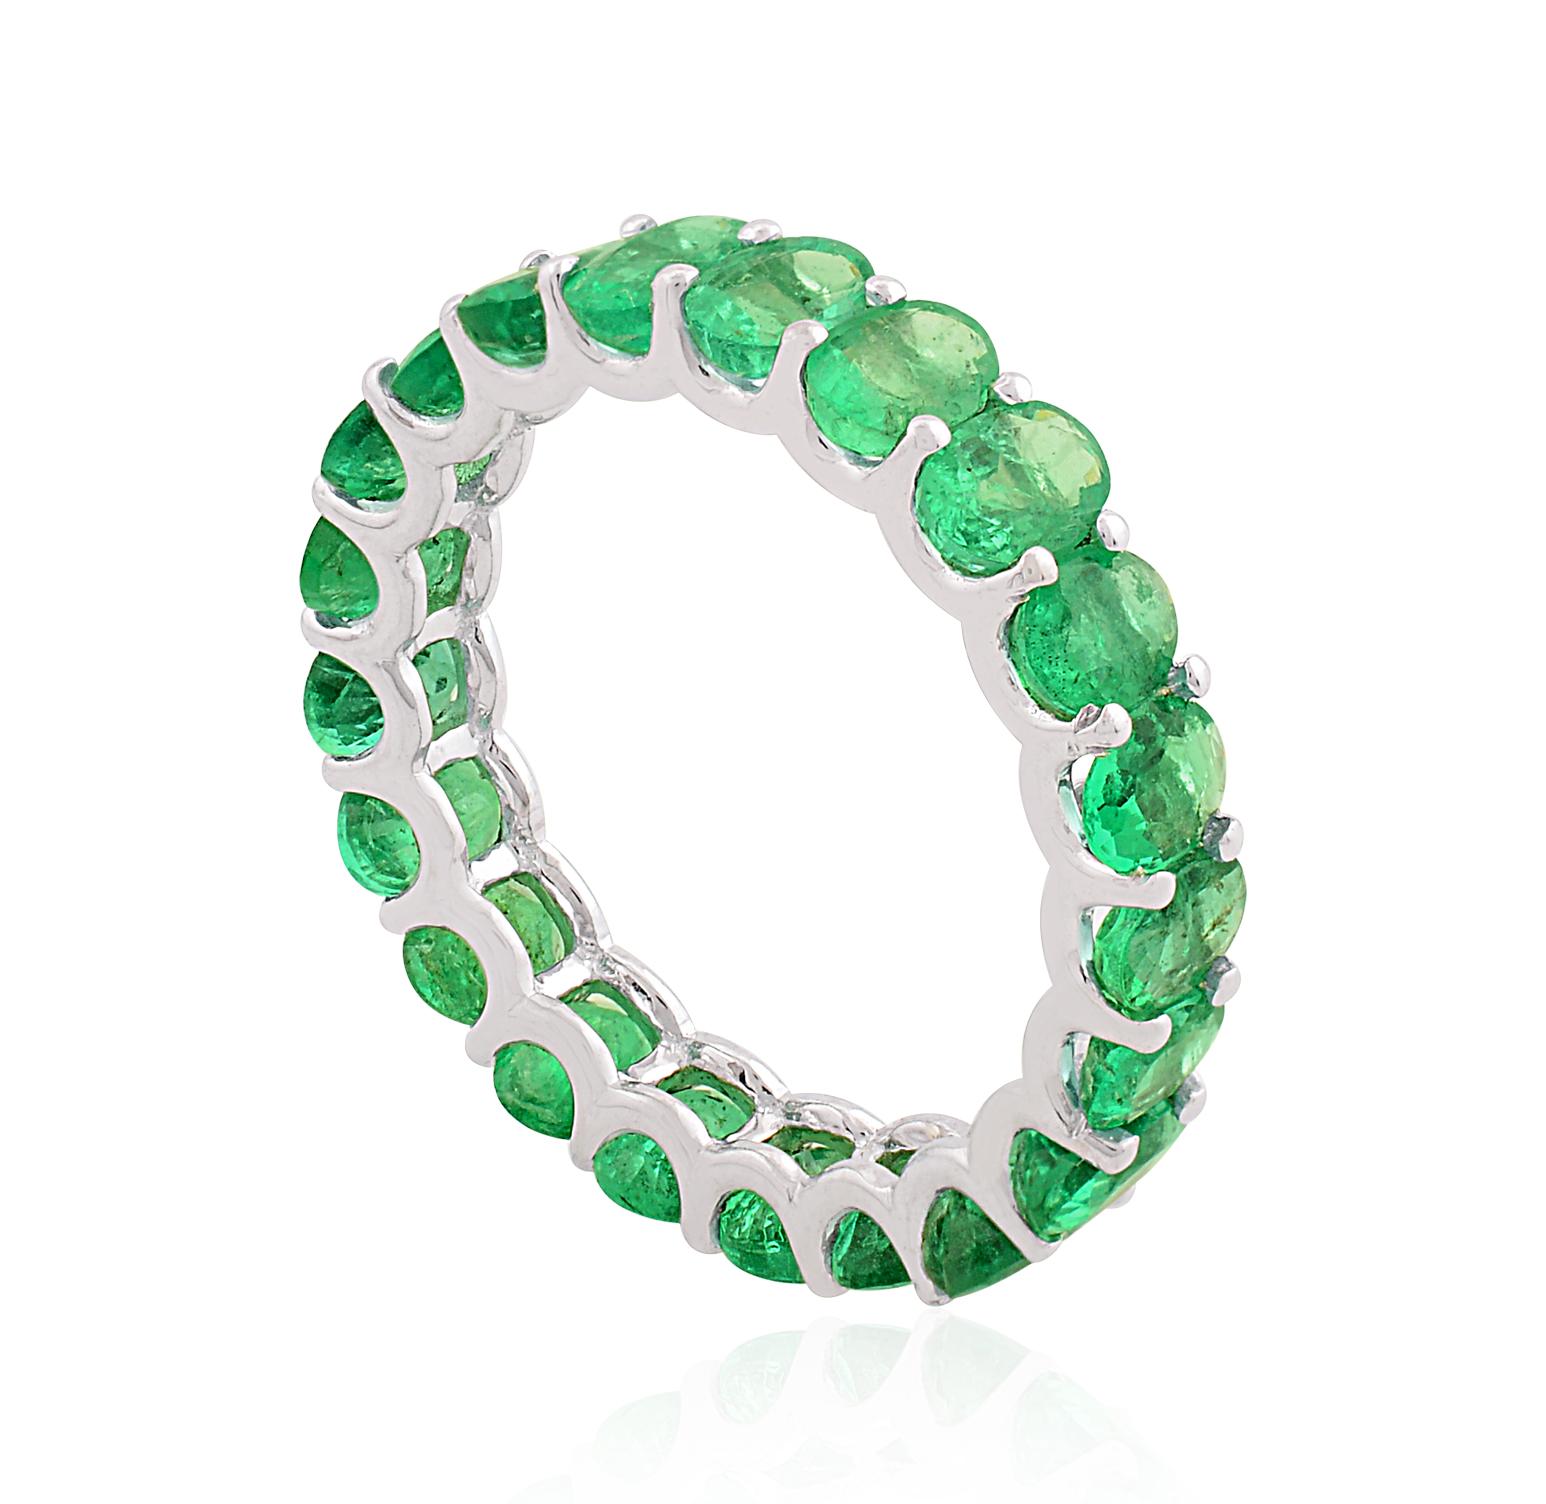 The emerald is delicately nestled within a band of gleaming 18 karat white gold, expertly shaped and polished to perfection. The purity and brilliance of the white gold complement the vivid green color of the emerald, creating a harmonious and